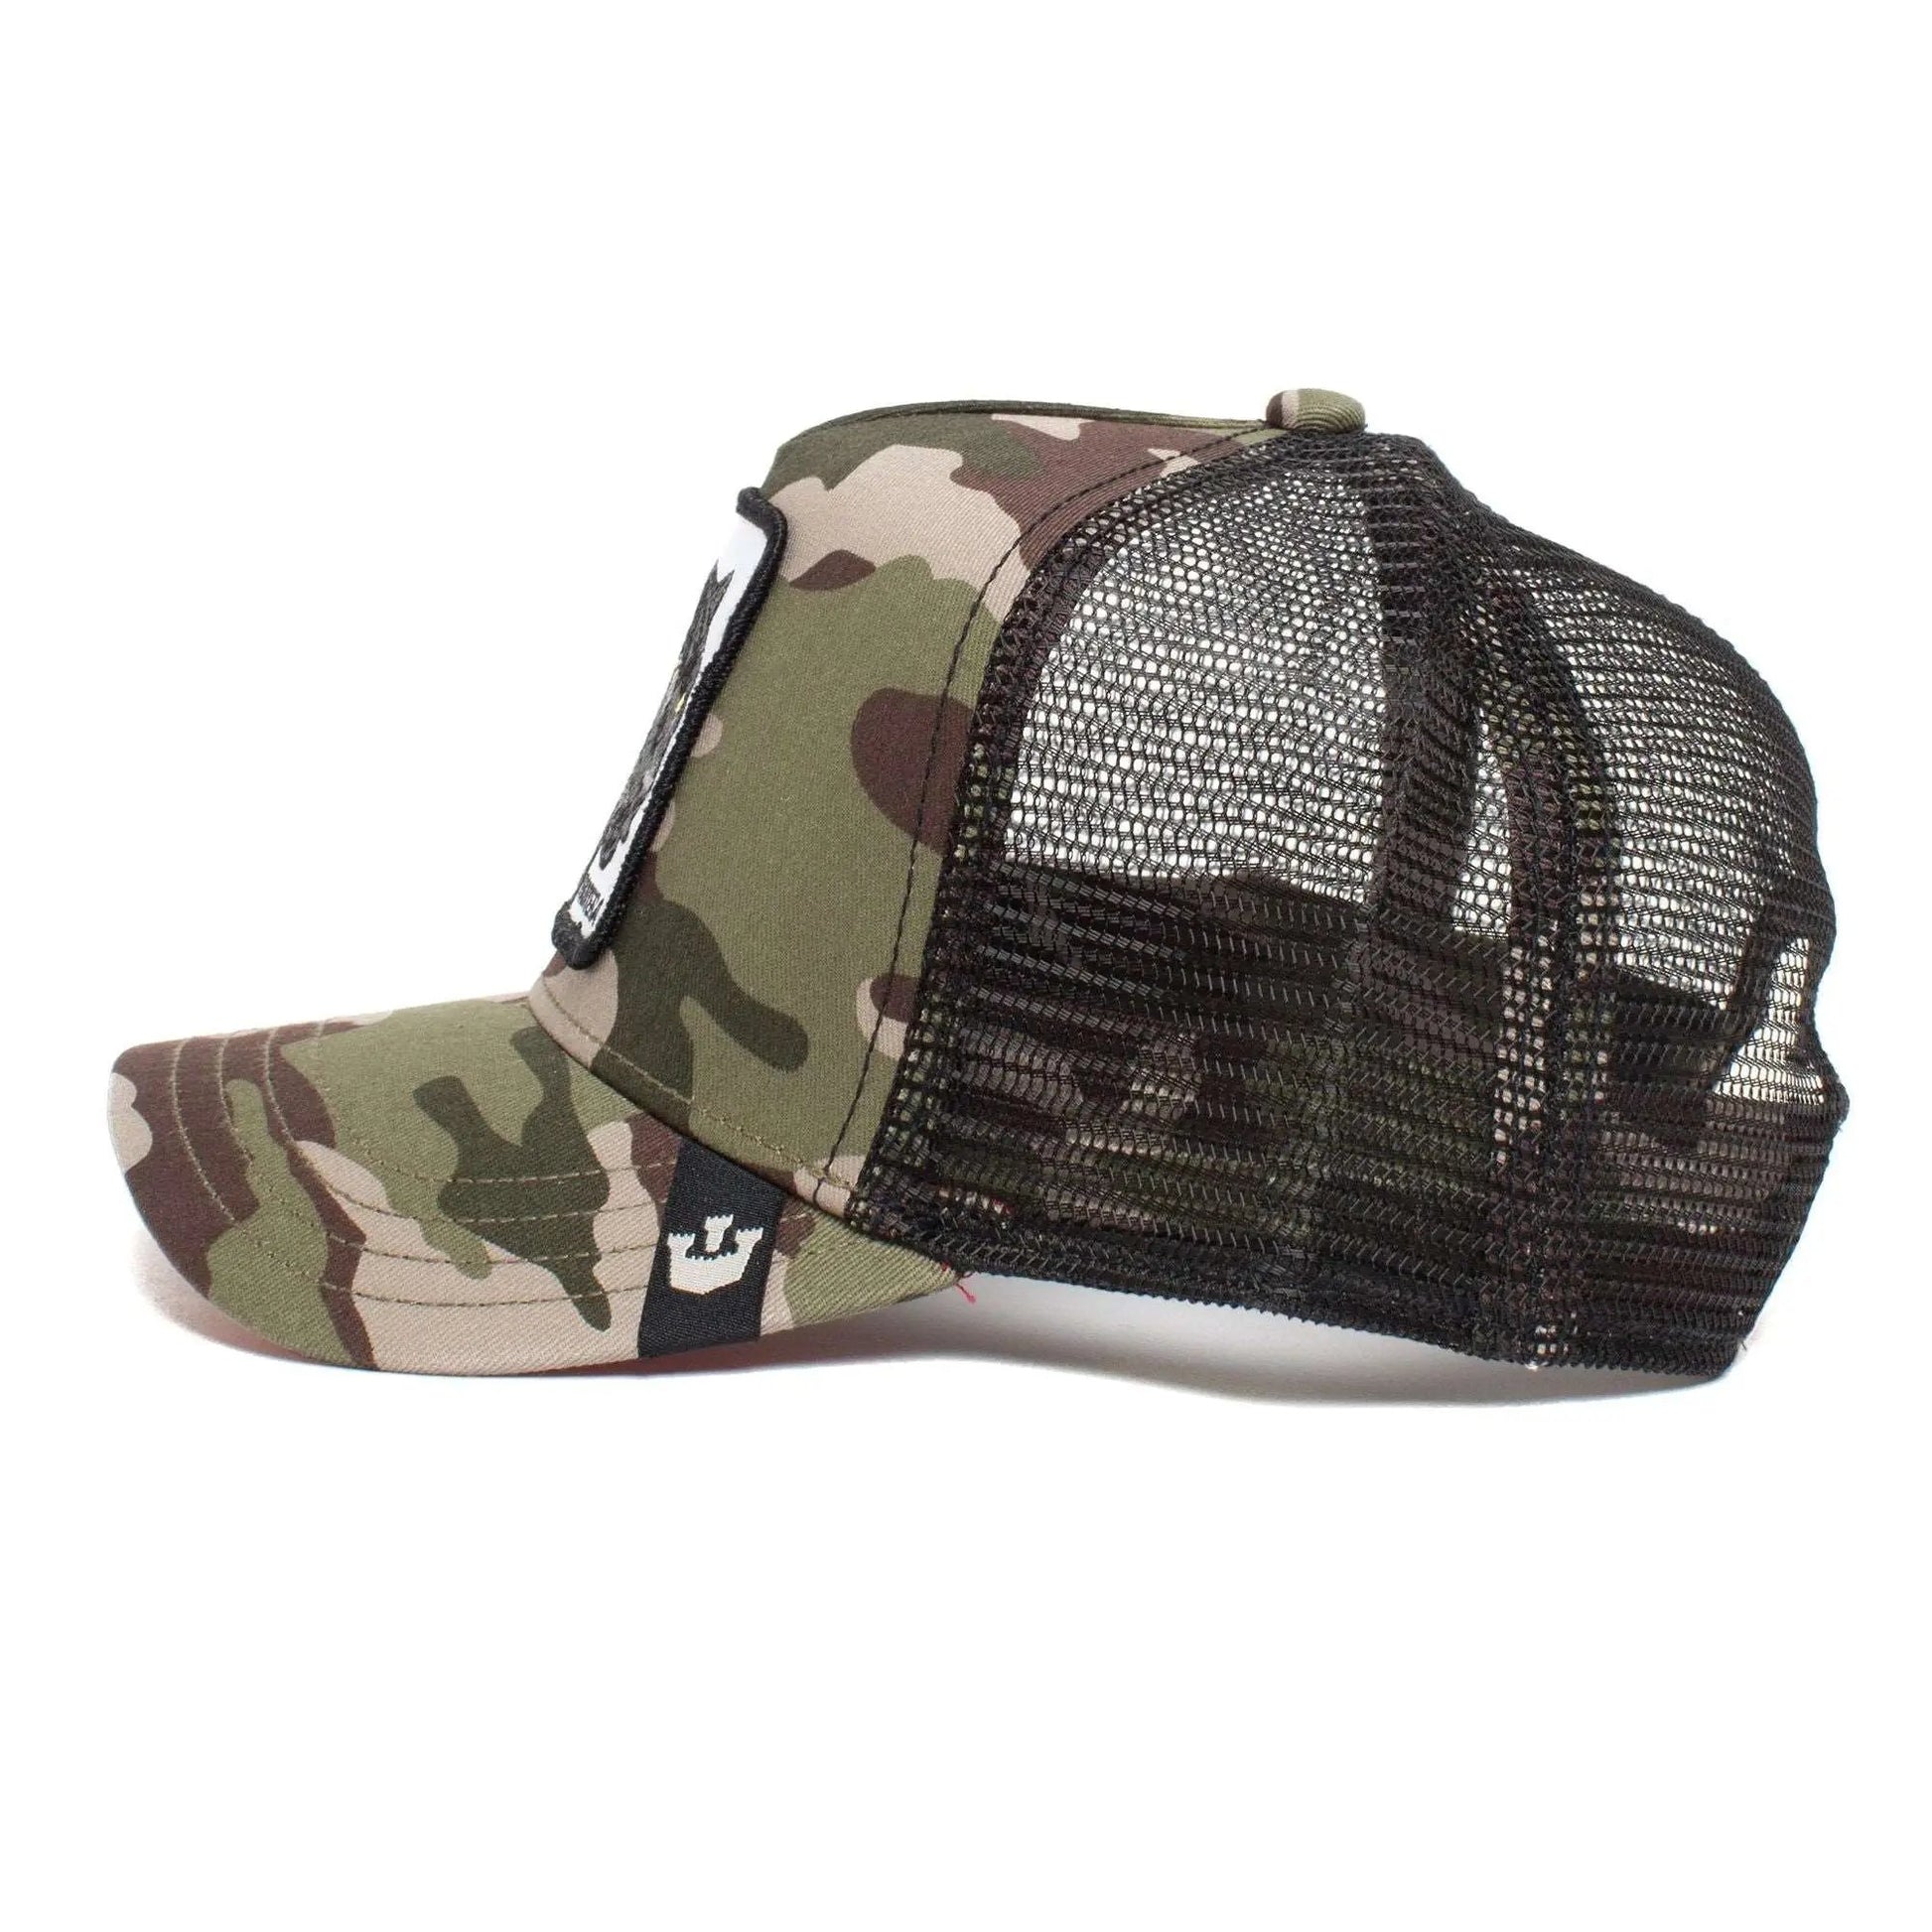 Mesh Hats - The Panther Camo